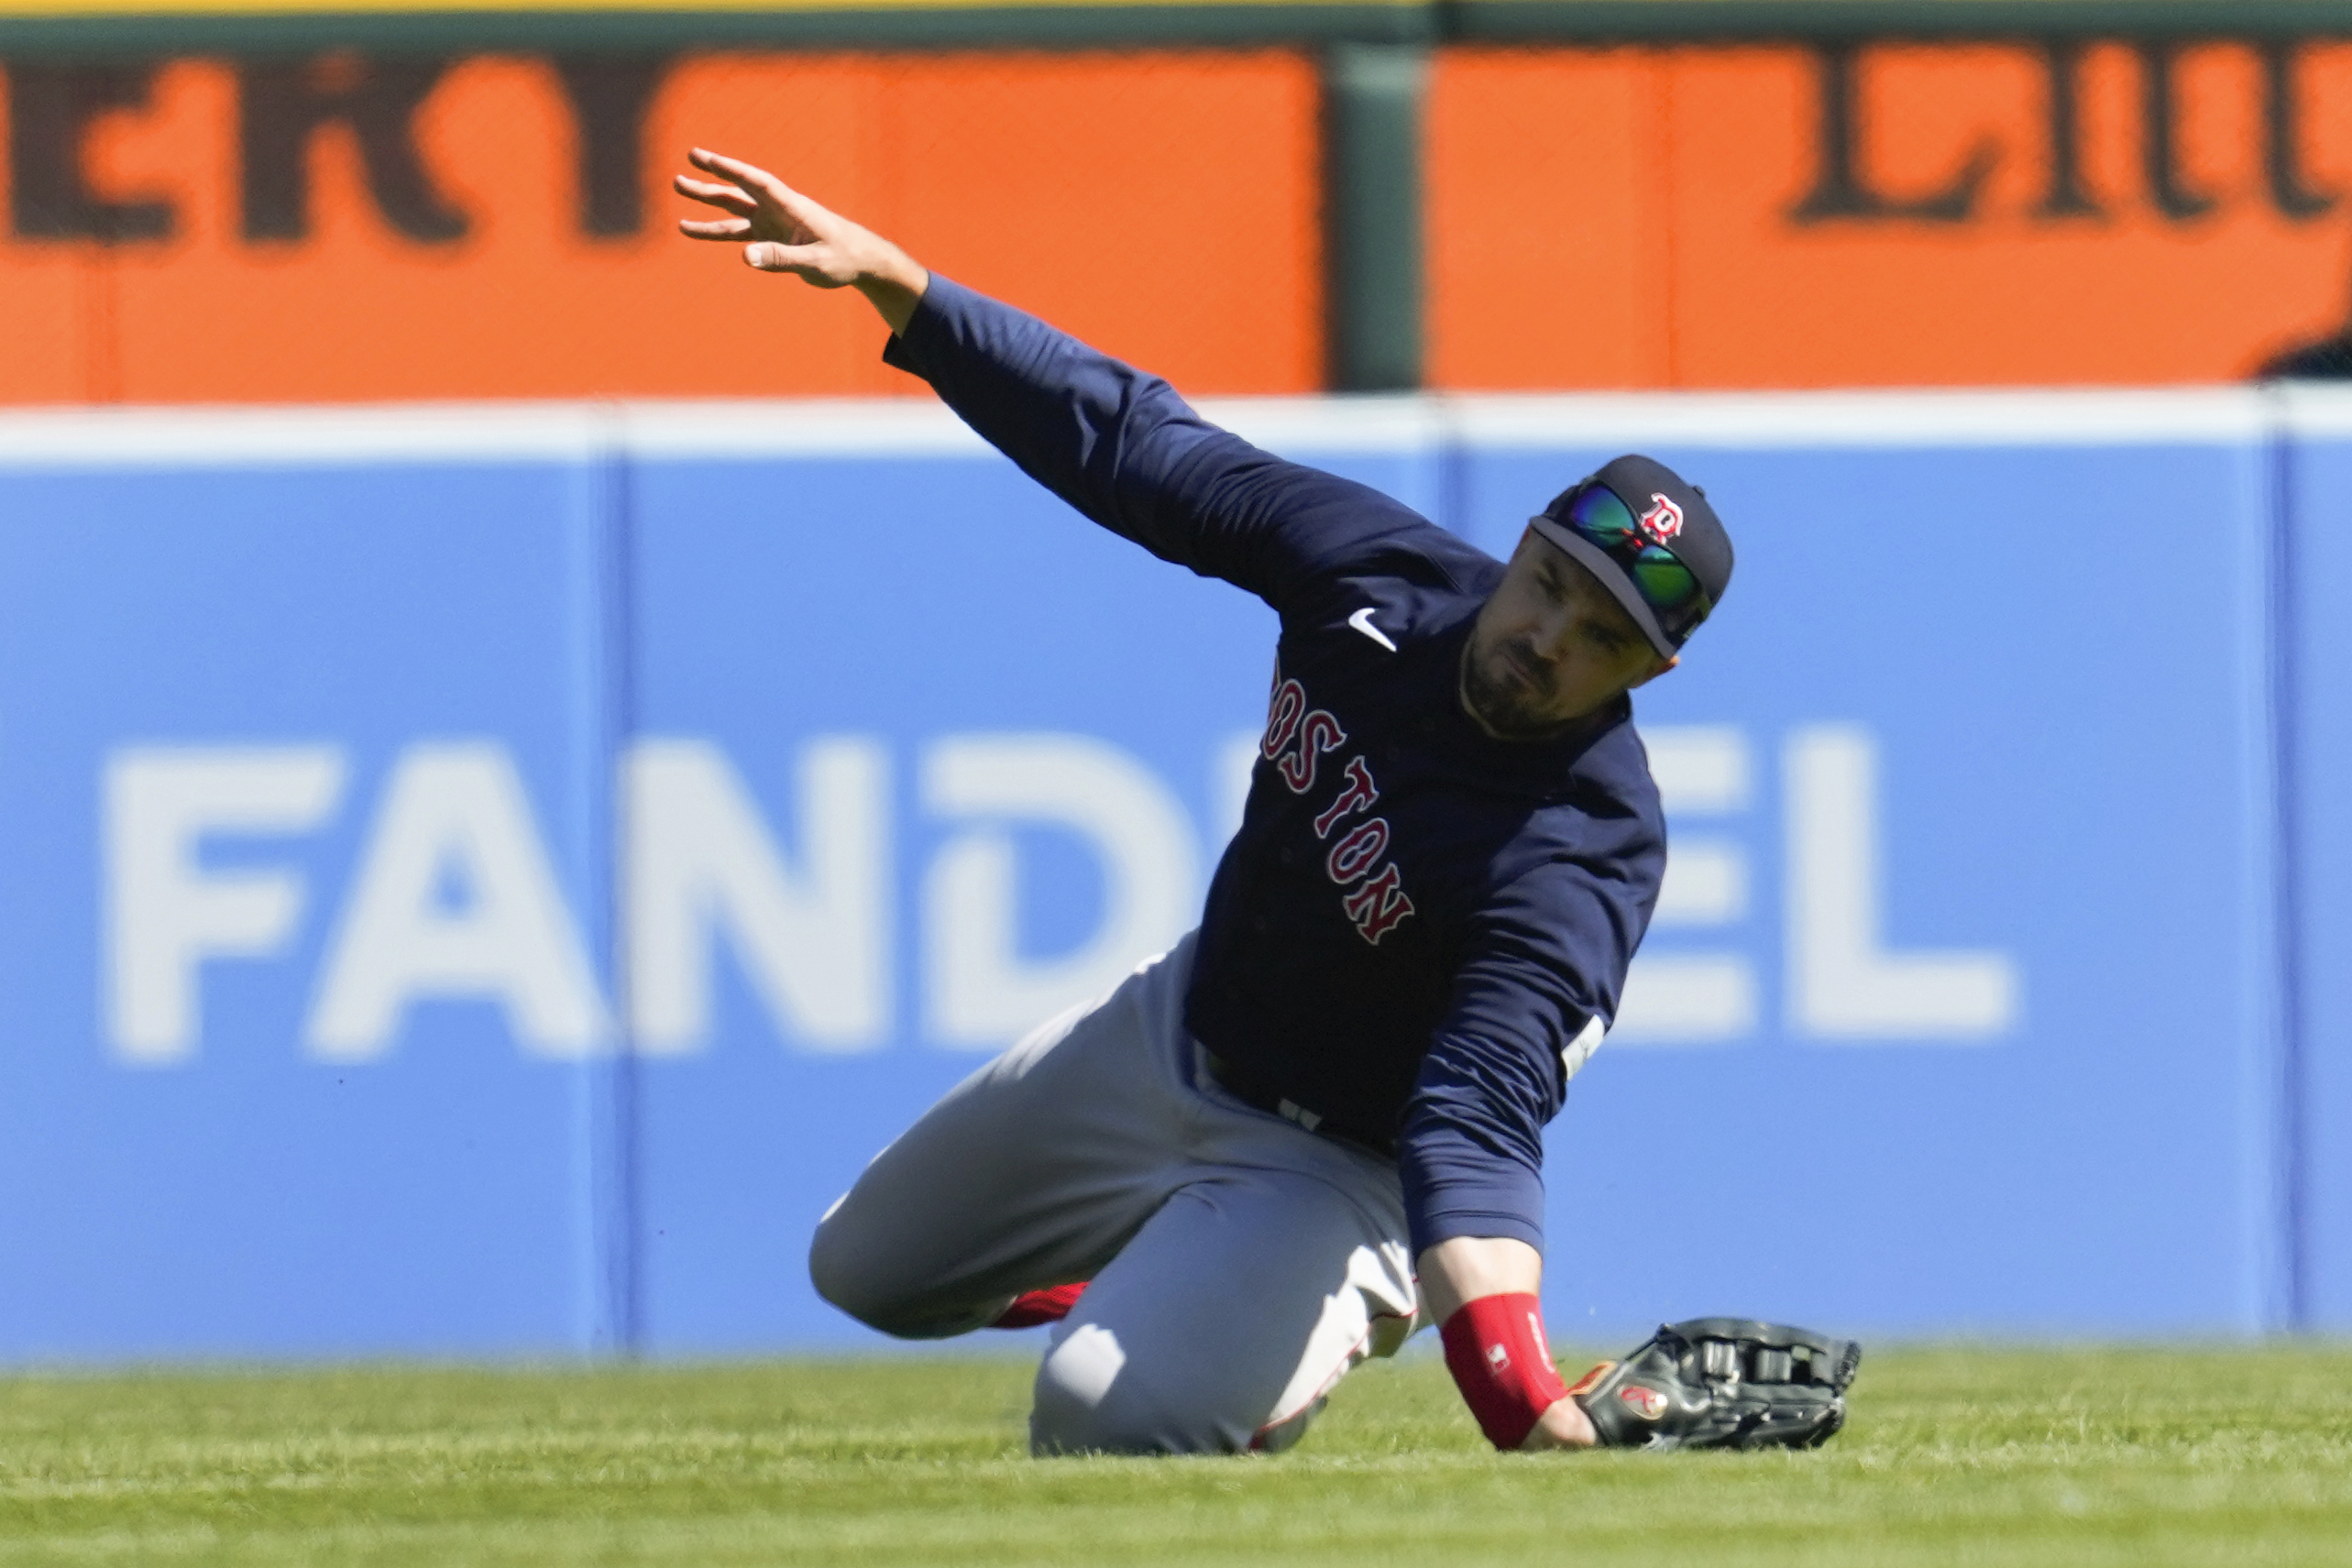 How will the Red Sox reshuffle their lineup without center fielder